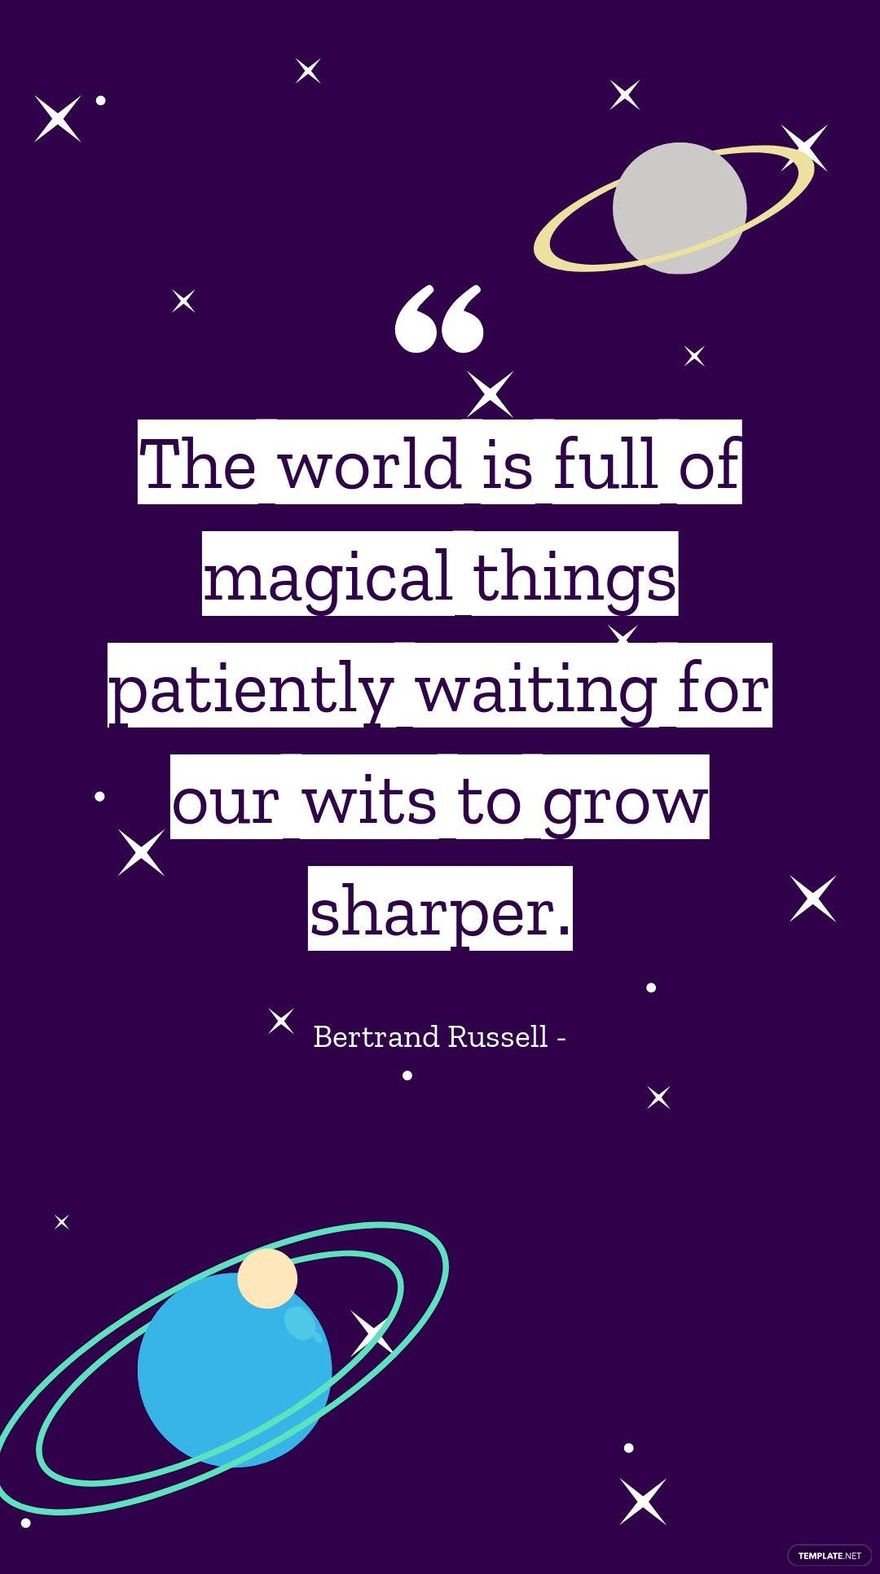 Bertrand Russell - The world is full of magical things patiently waiting for our wits to grow sharper.